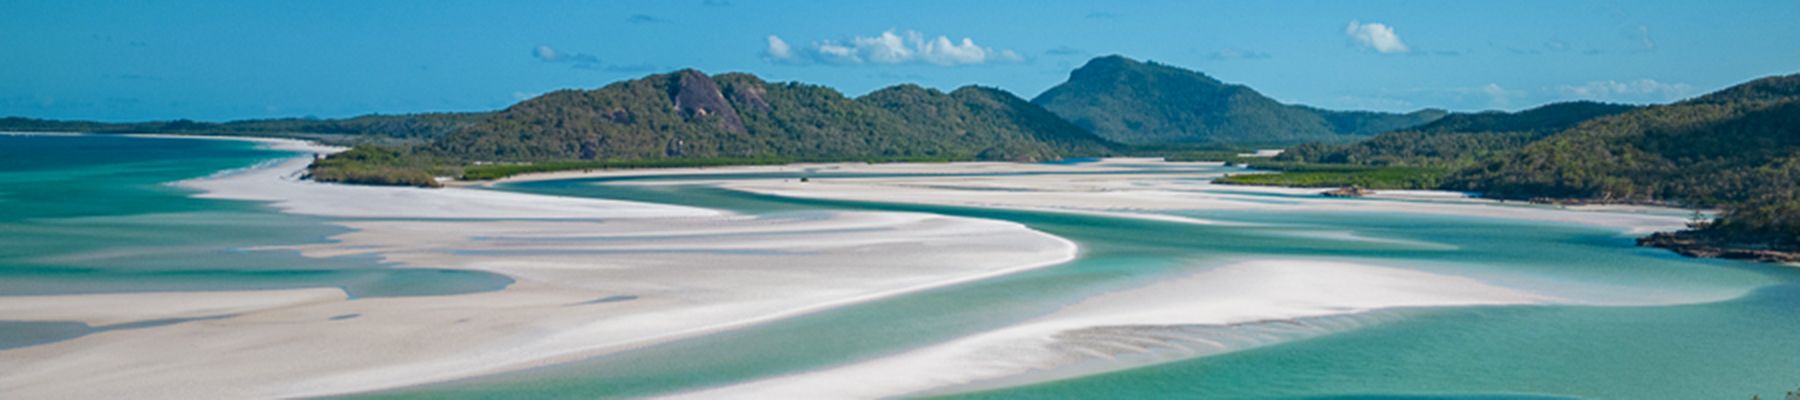 Whistunday Island's Hill Inlet Lookout with mountains and swirling sands and waters